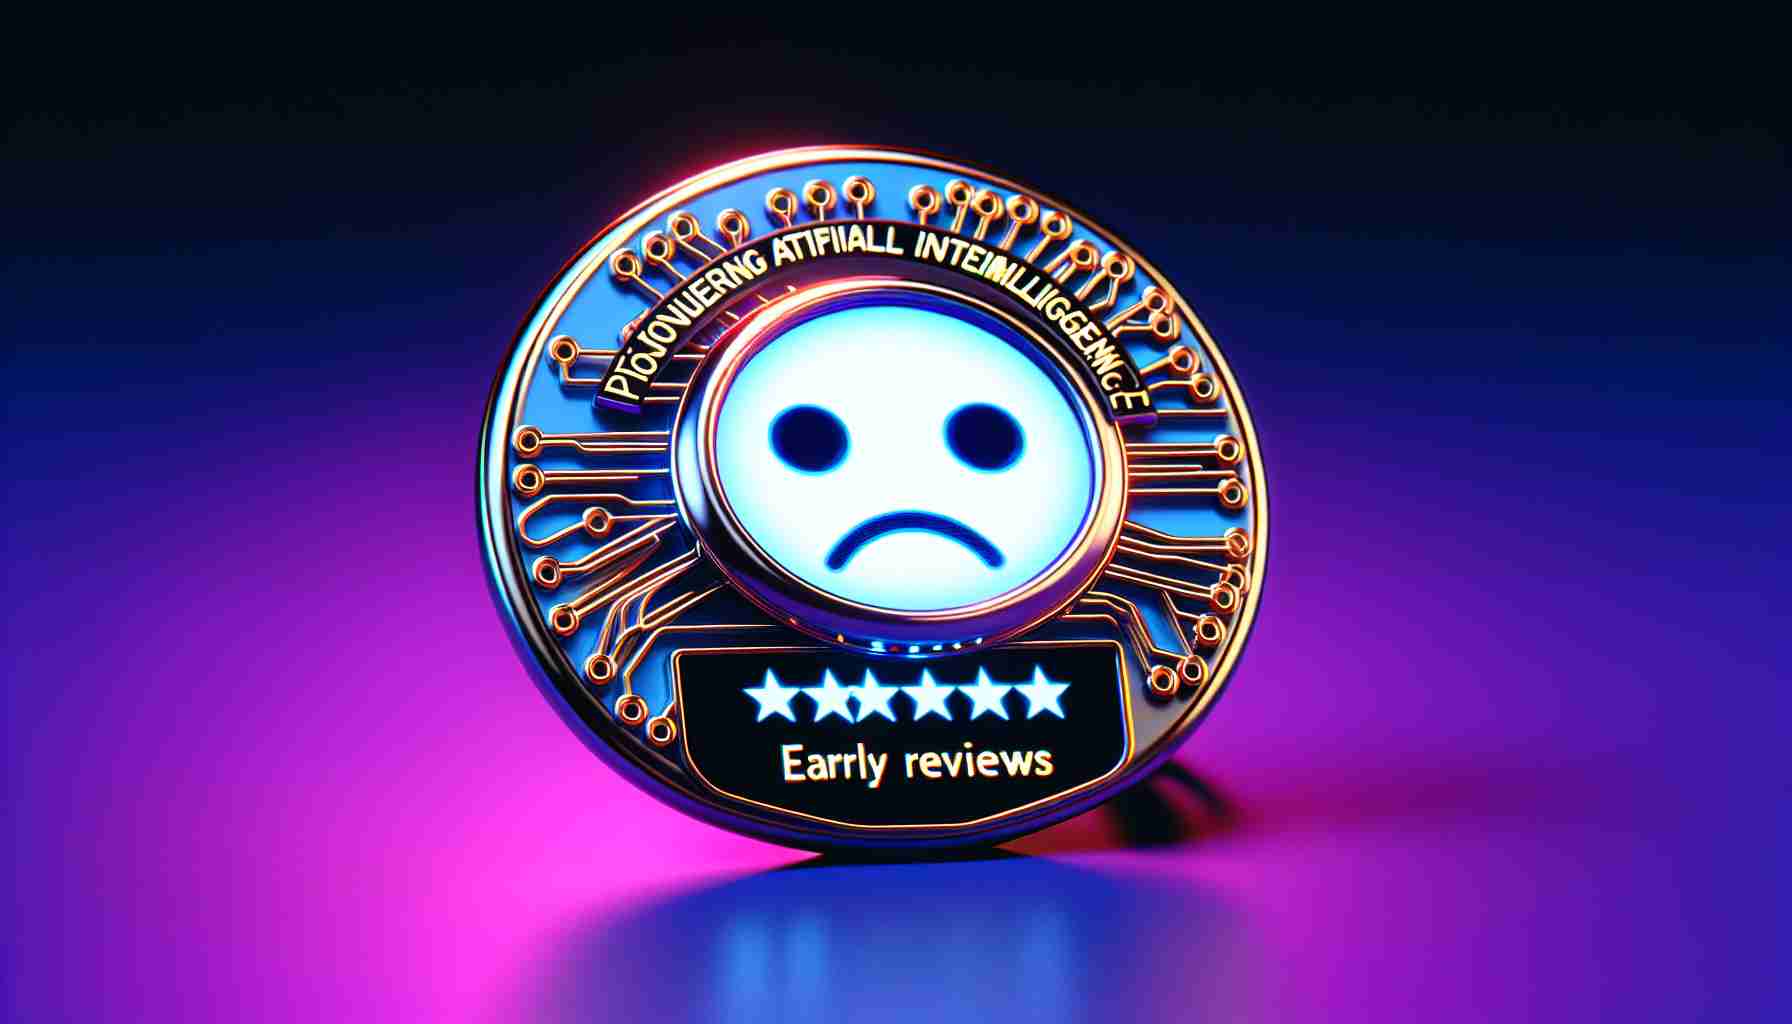 Innovative AI Pin Disappoints in Early Reviews